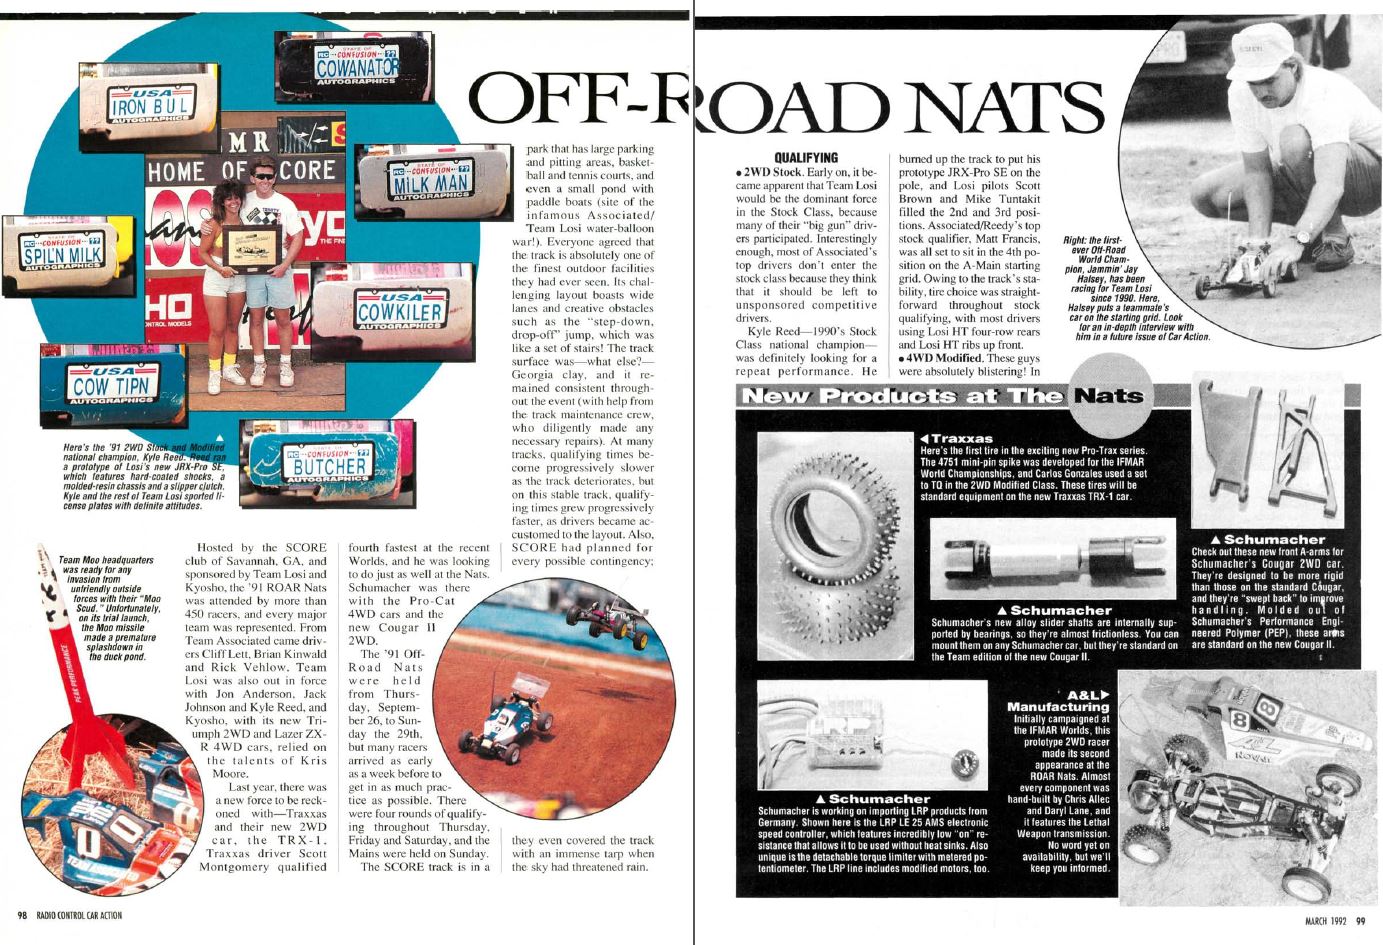 Coverage of the 91 ROAR Off-Road Electric Nats March 1992